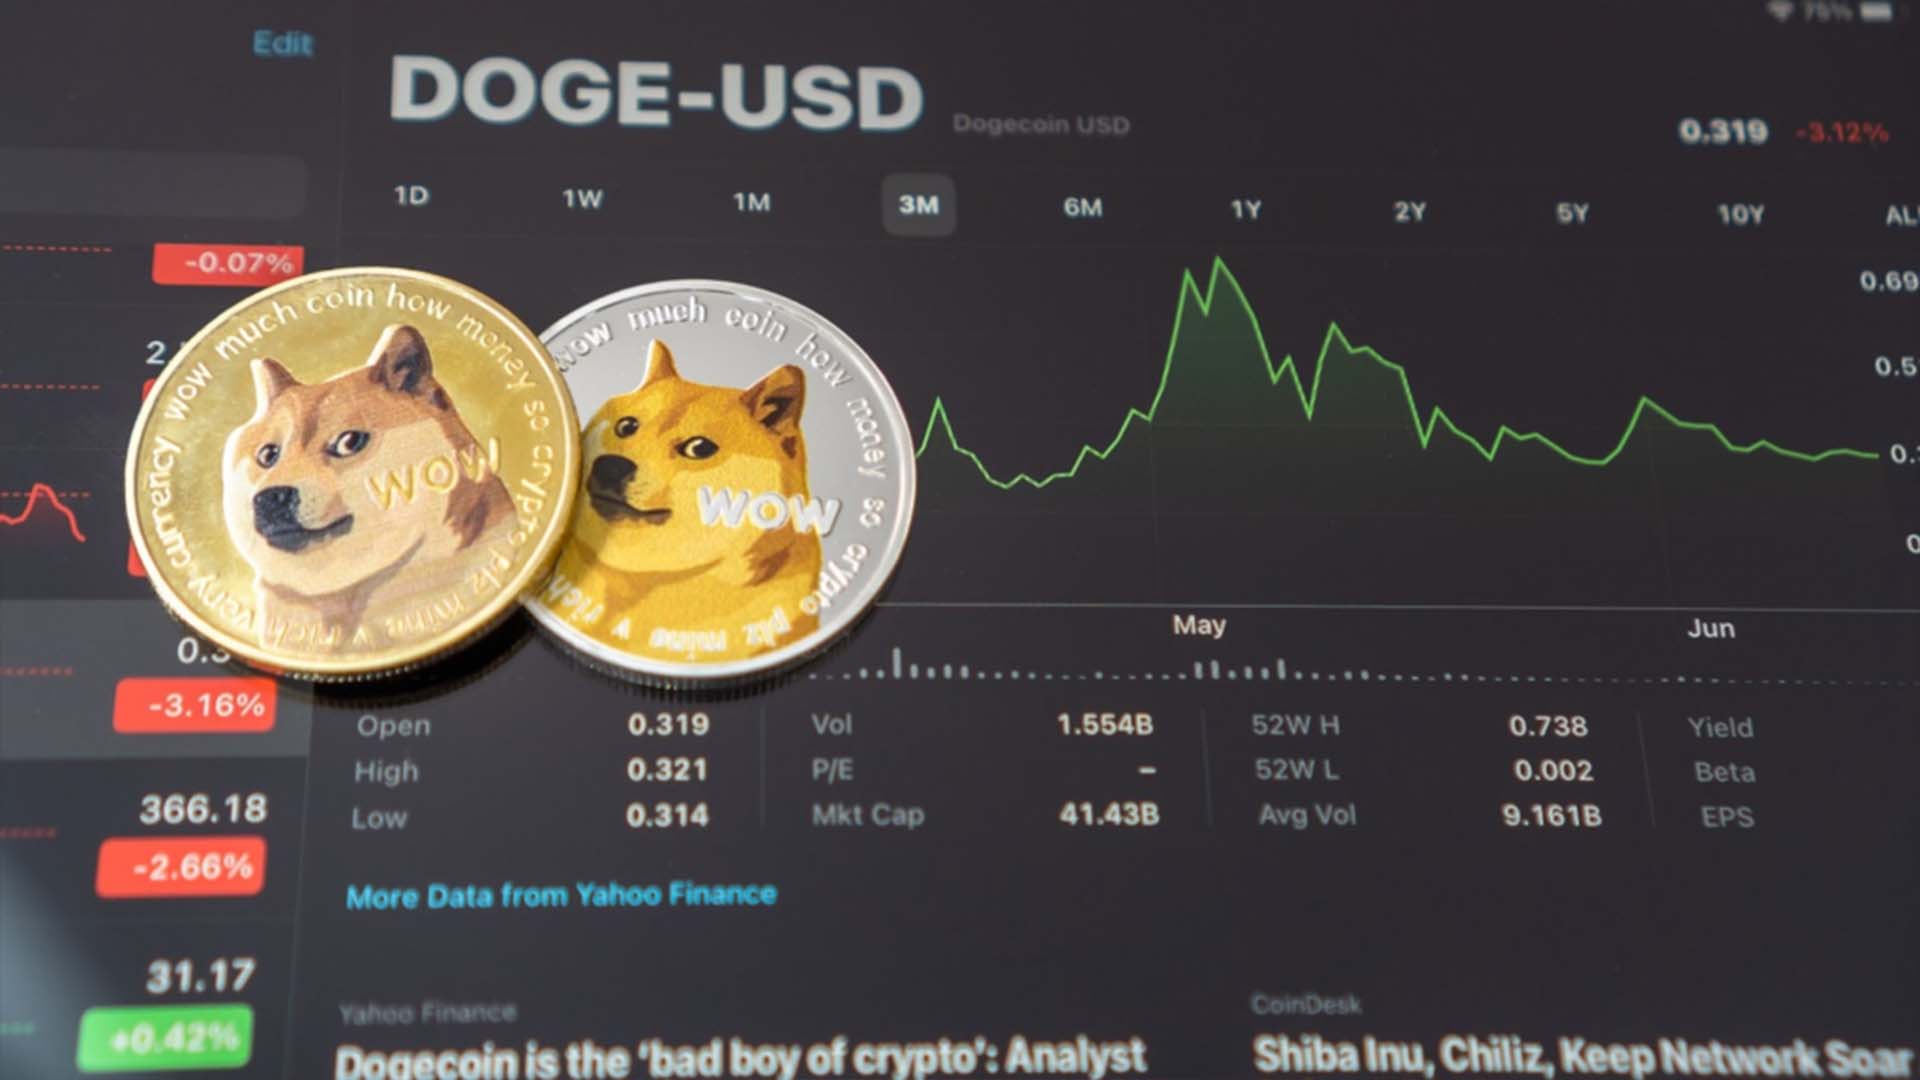 DigiToad emerges as the rising star alongside Dogecoin, fueling the surge in meme coin trading volume